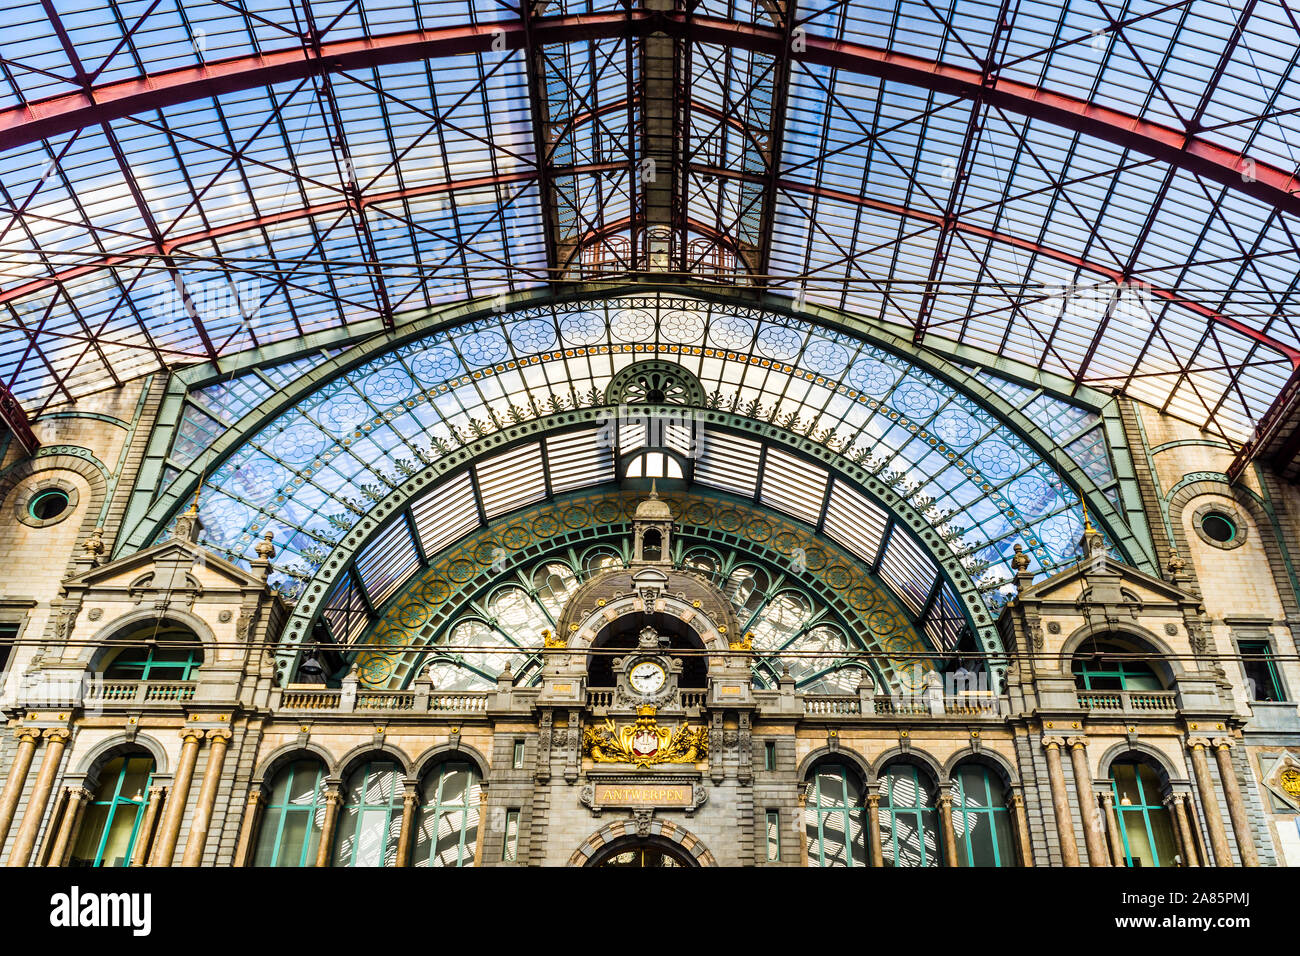 Interior of upper level of Antwerp Central railway station with iron and glass roof - Belgium. Stock Photo